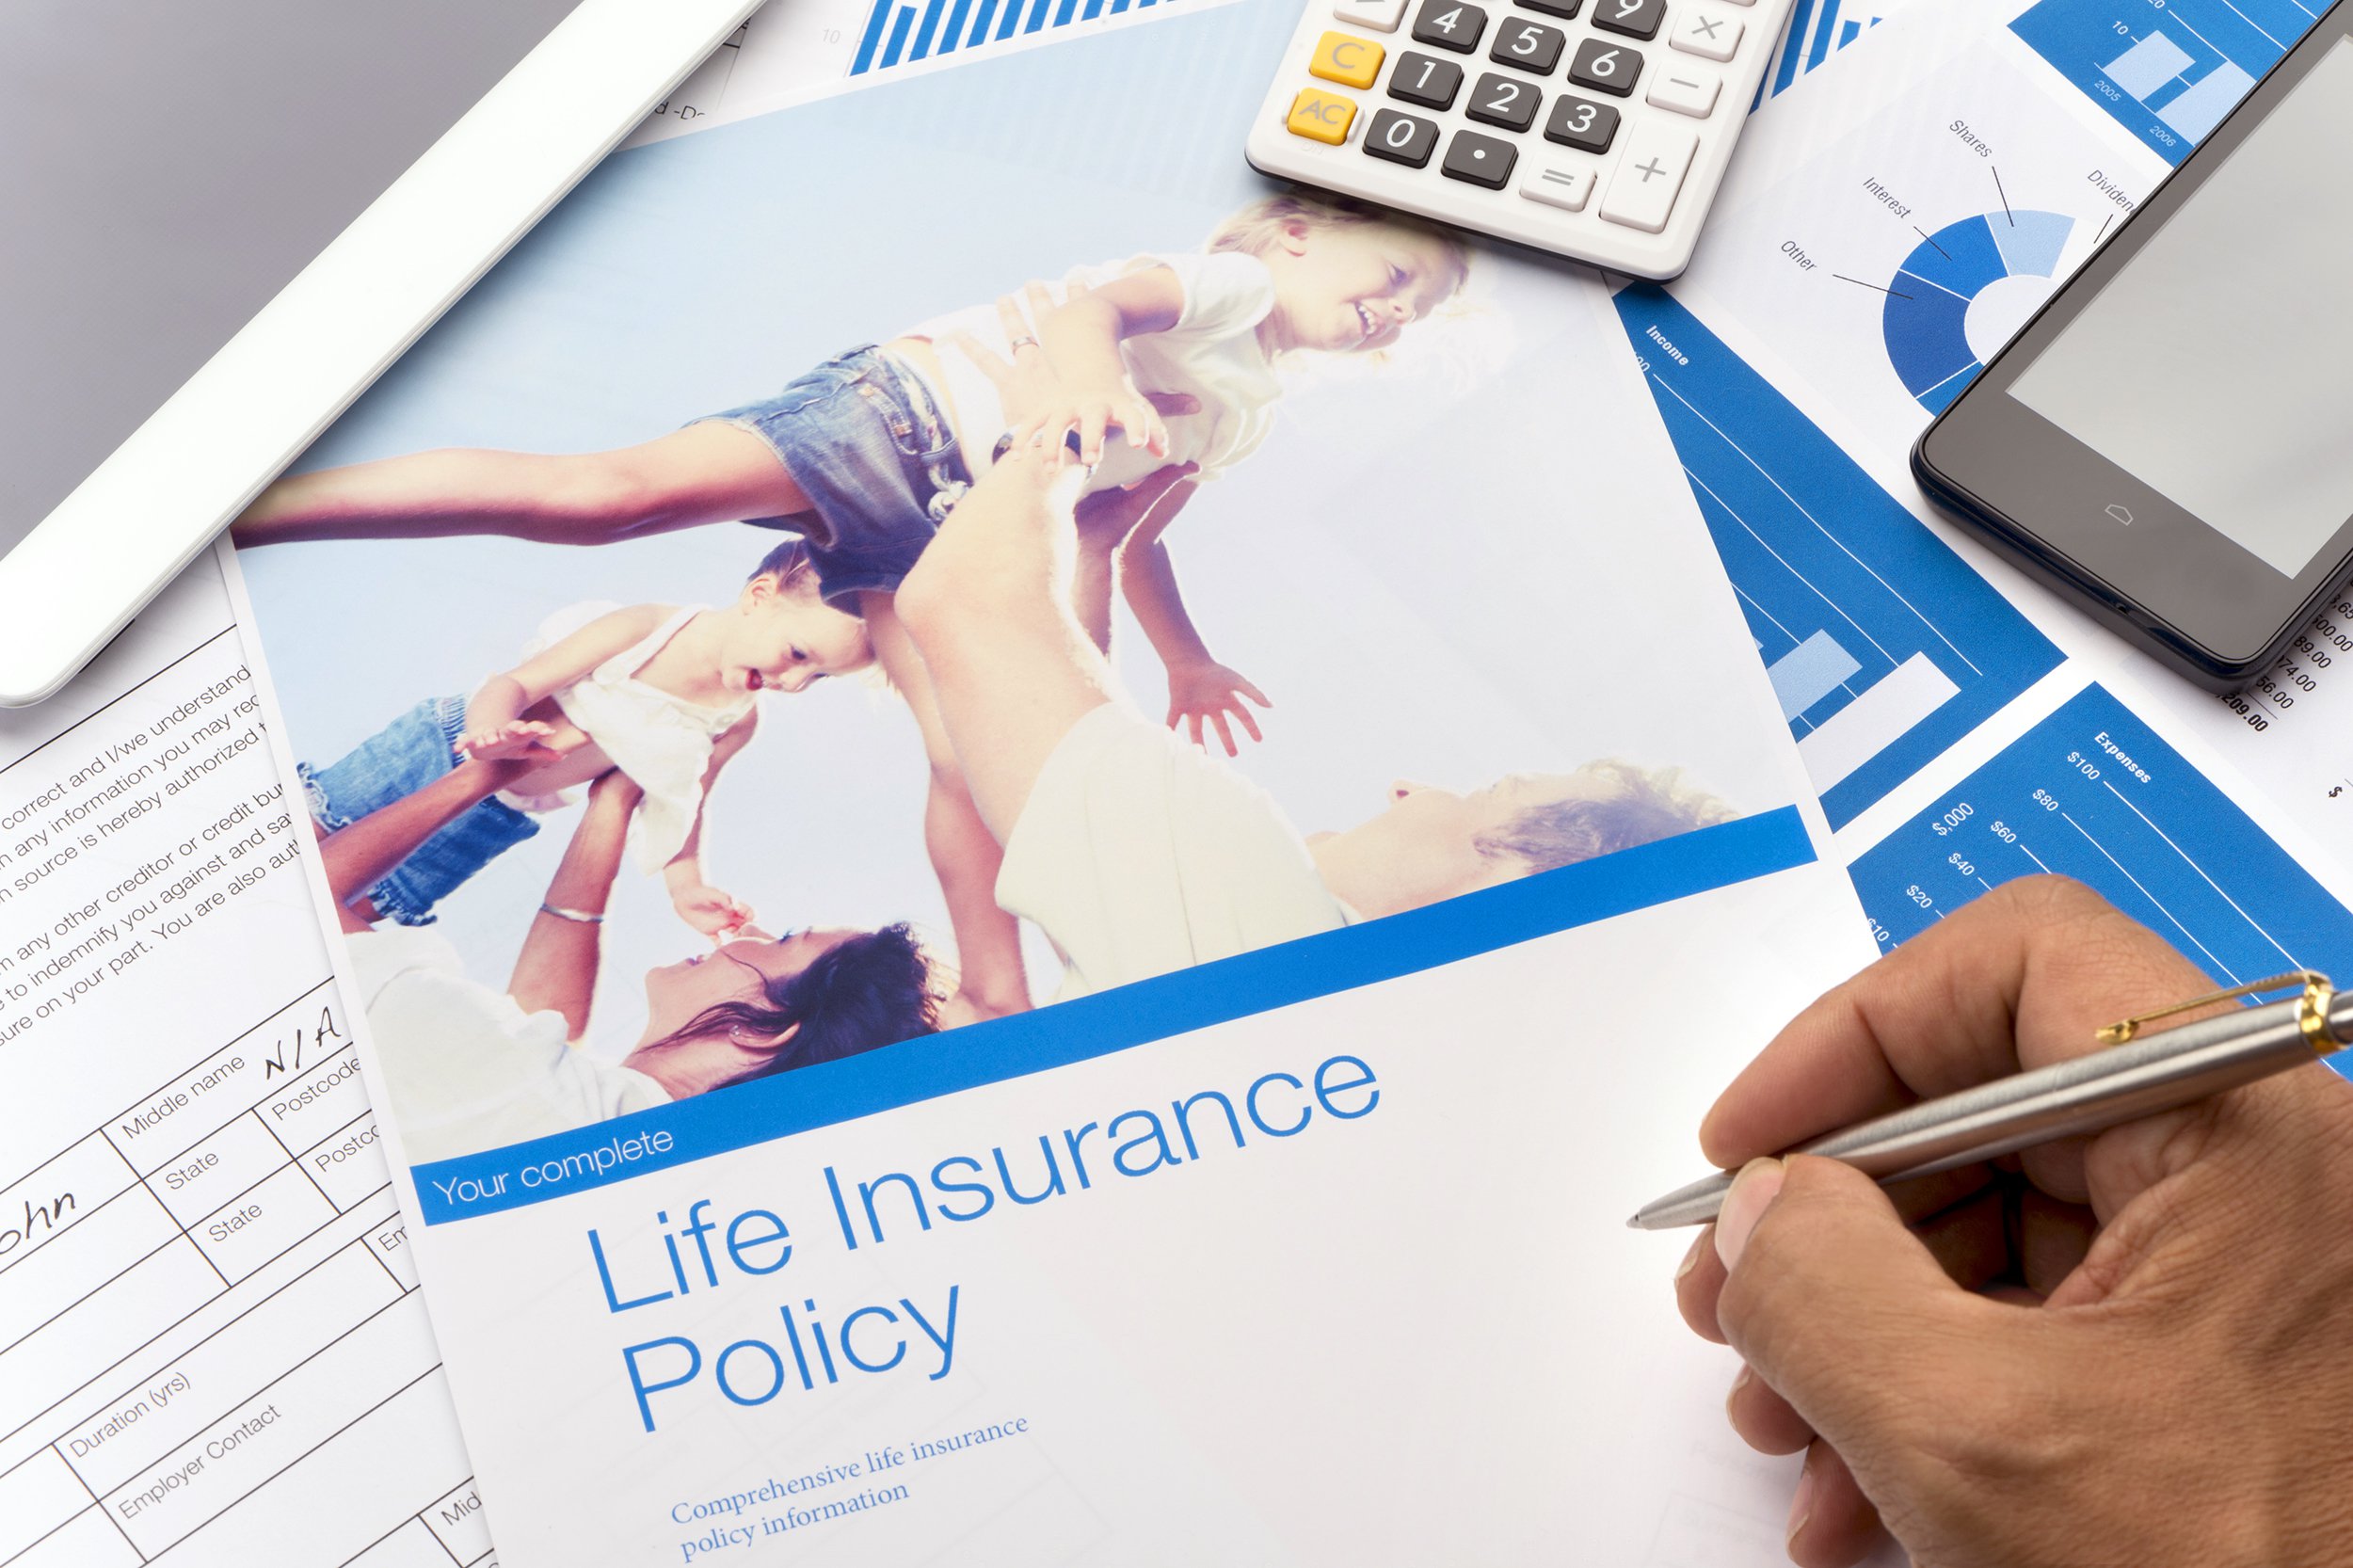 <p>When you had, potentially, 60 years ahead of you, things like life insurance were a snore — something for old fogies (there's one of those phrases again). Now, you worry about providing for your loved ones. </p><p><b>Related:</b> <a href="https://blog.cheapism.com/cheap-life-insurance-3538/">32 Ways to Save on Life Insurance</a></p>